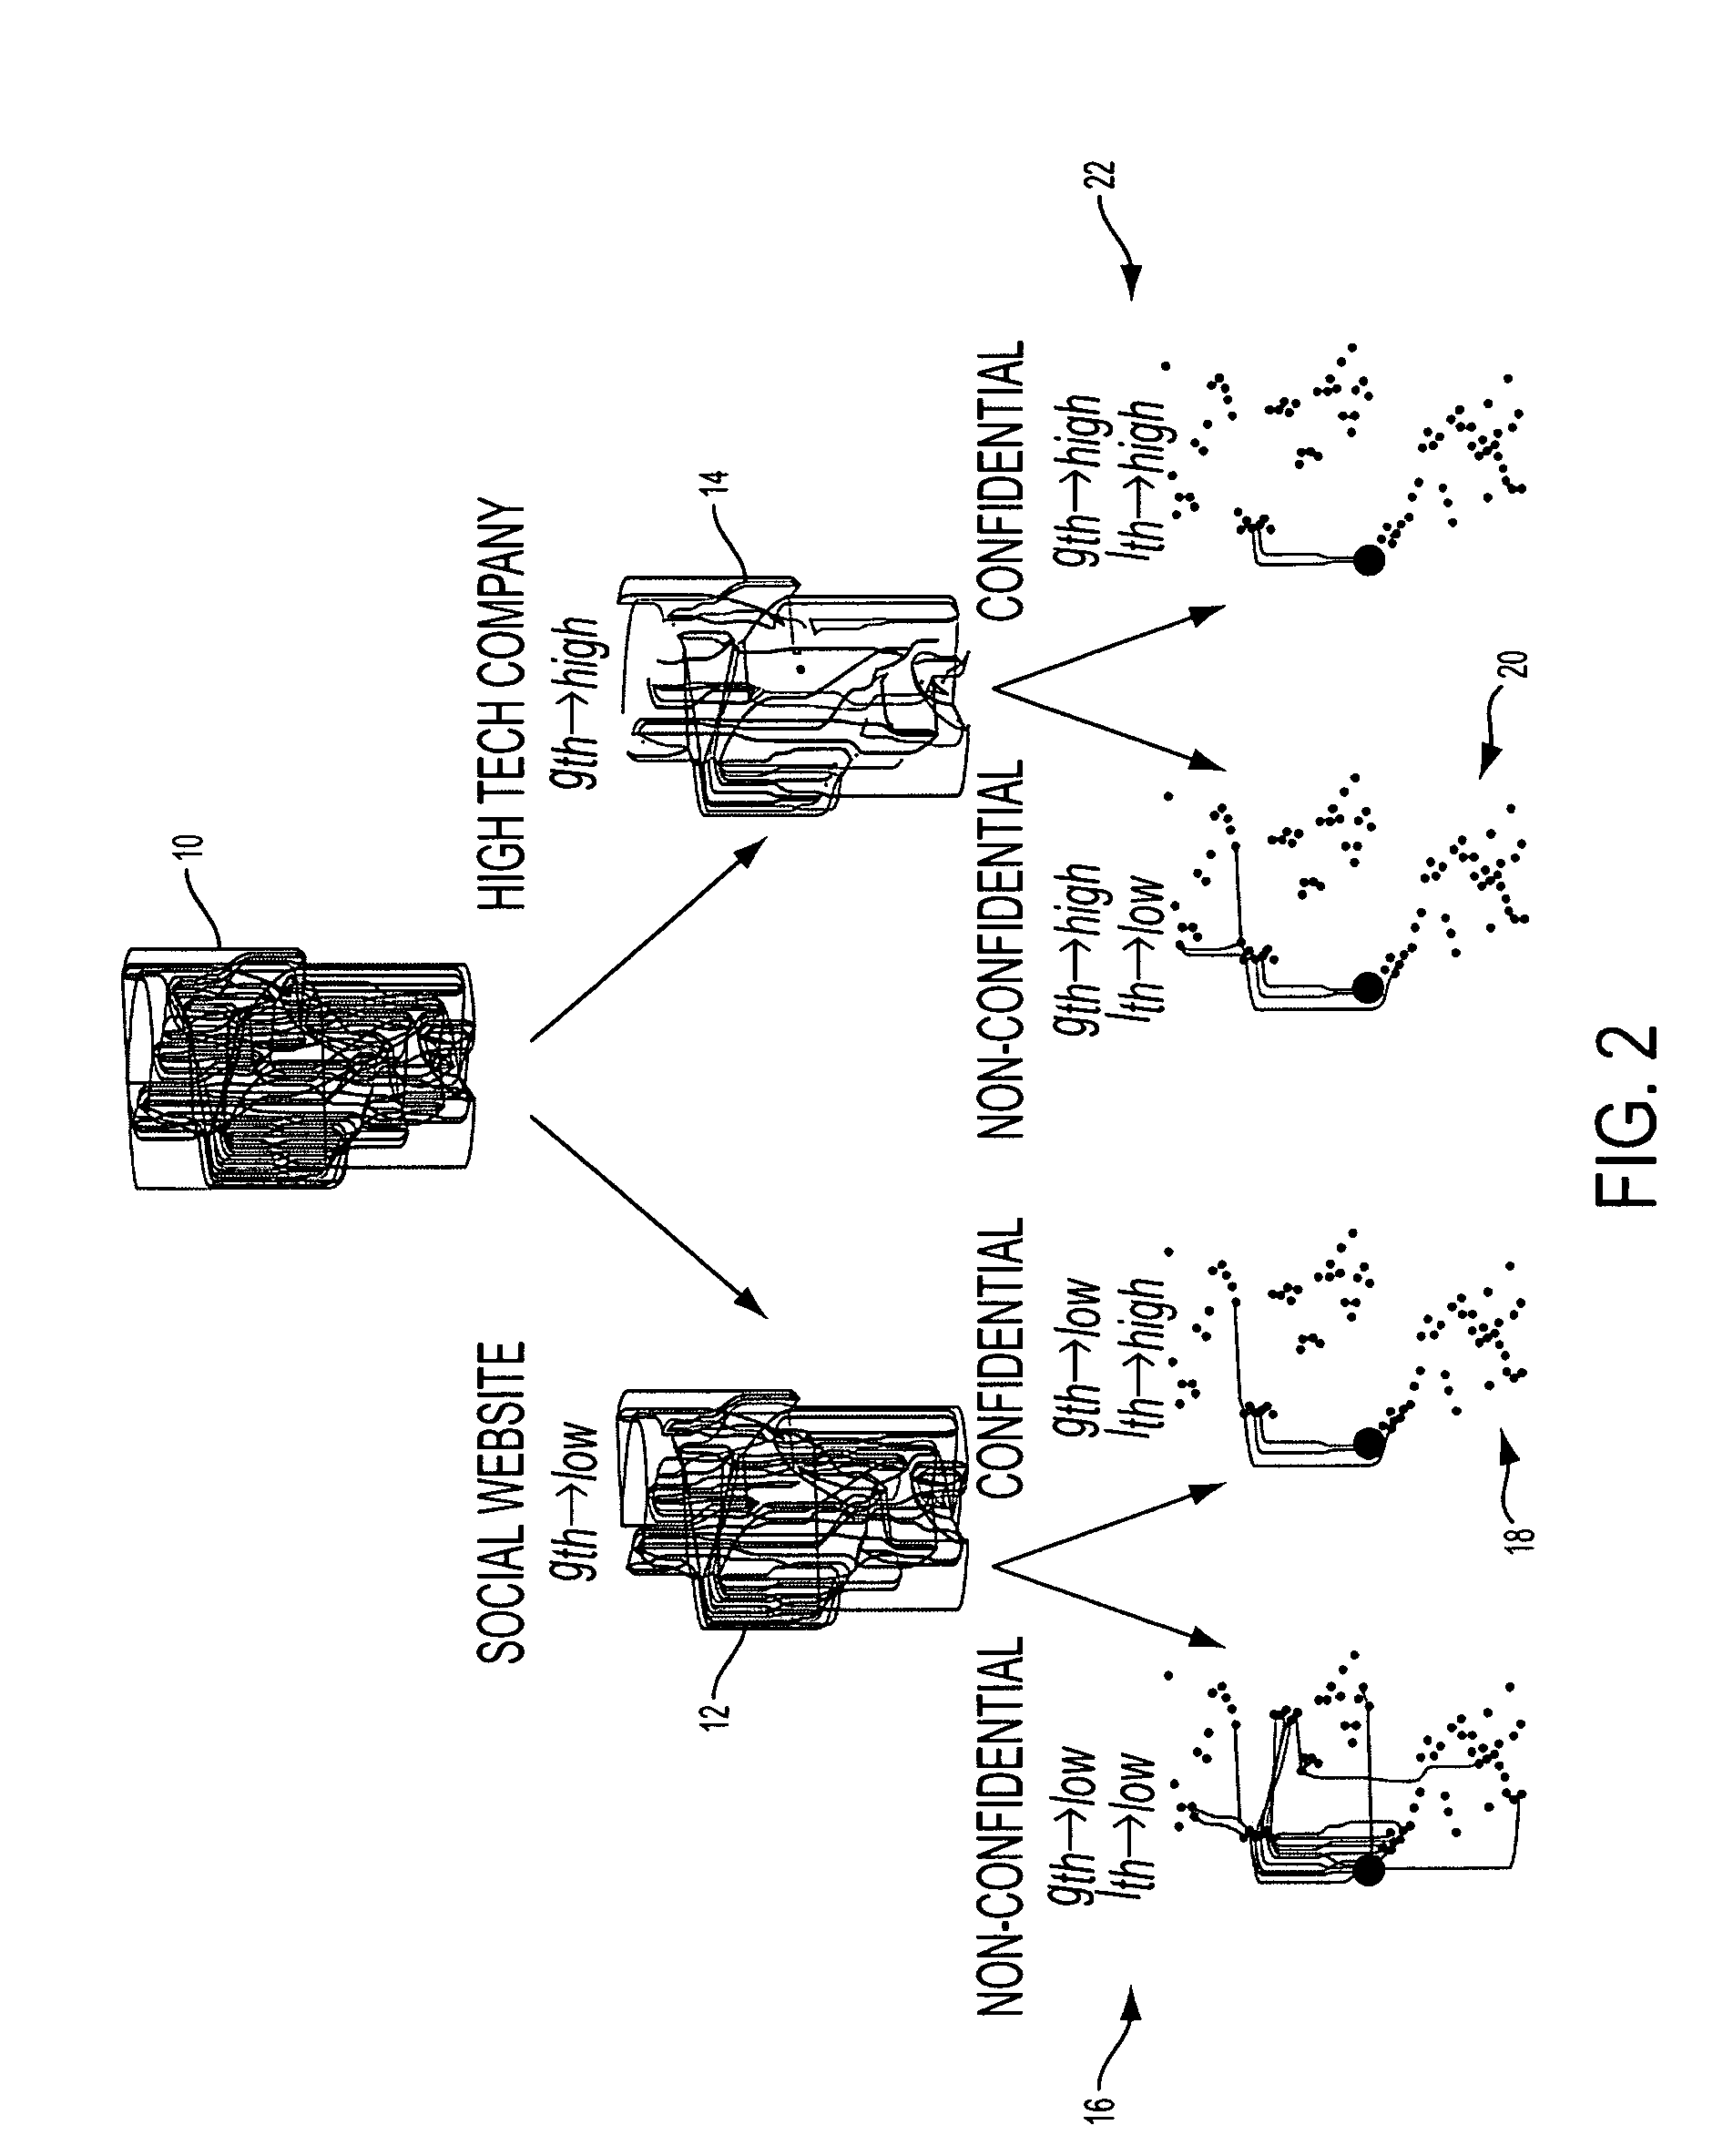 Document access management method and system